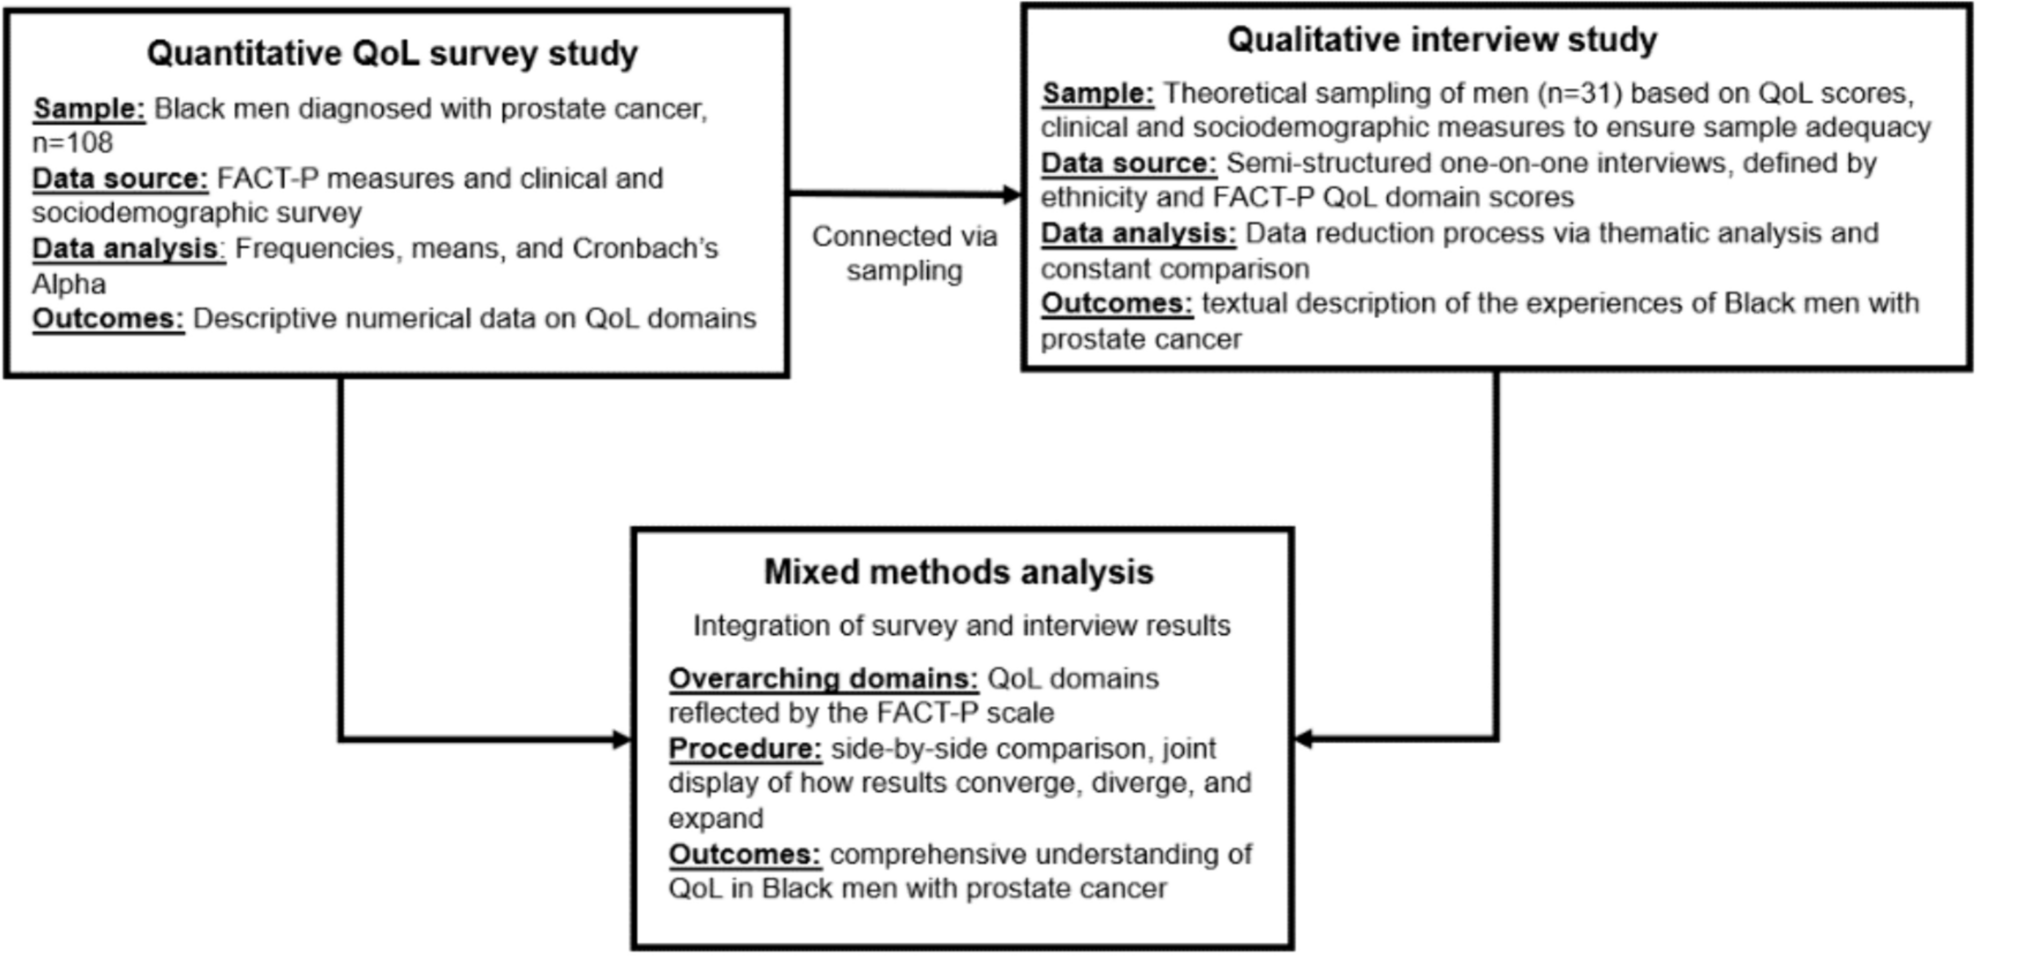 Health-related quality of life in ethnically diverse Black prostate cancer survivors: a convergent parallel mixed-methods approach